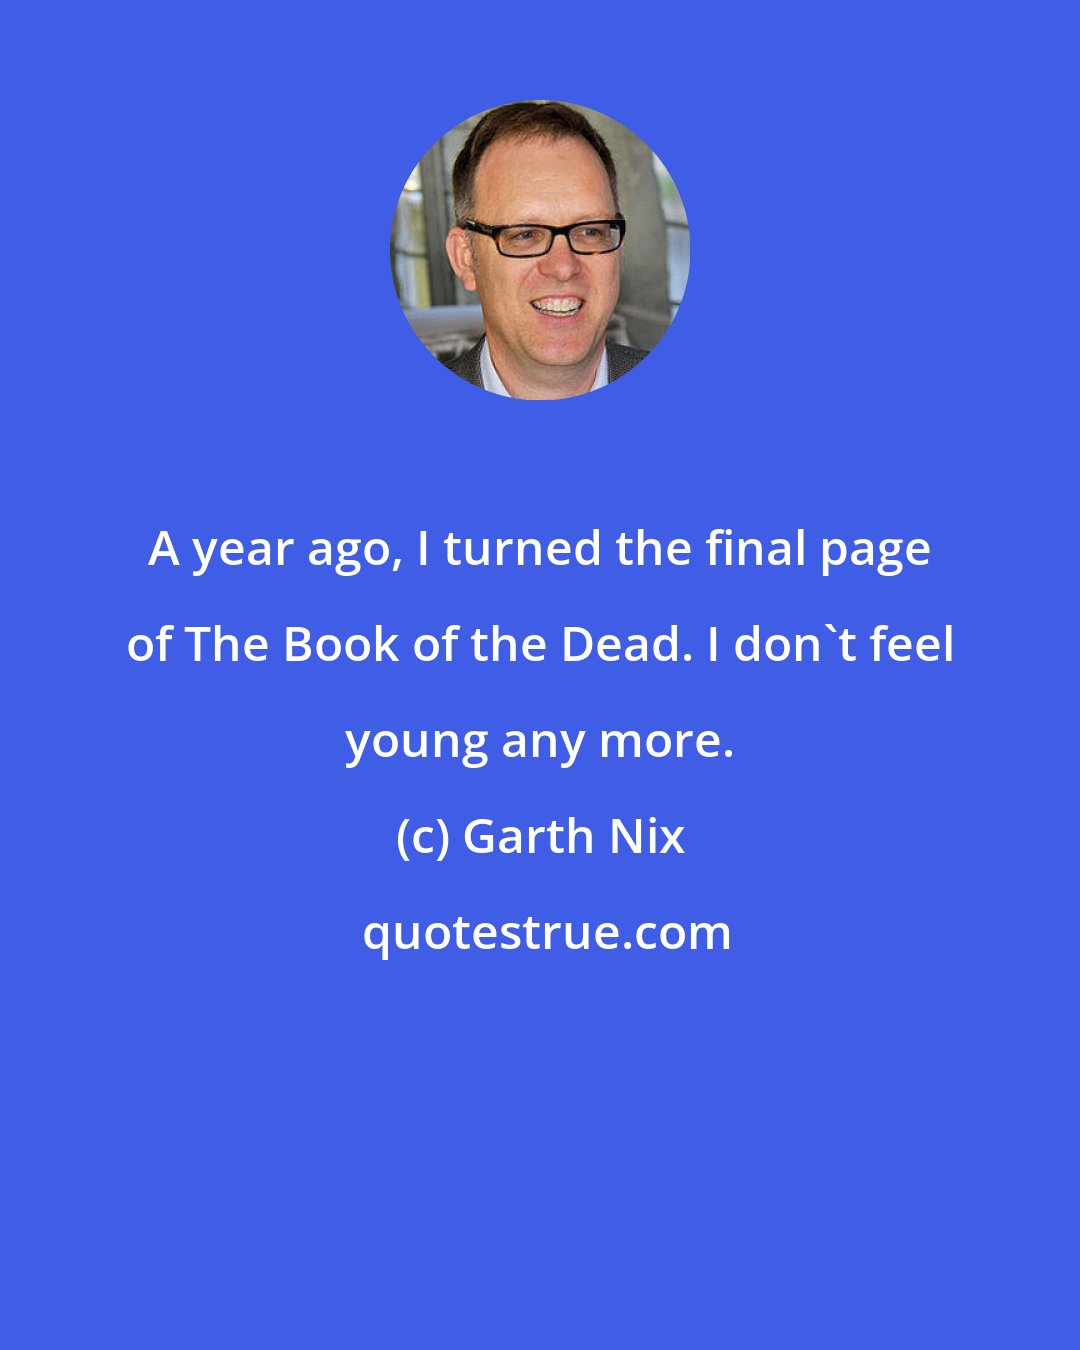 Garth Nix: A year ago, I turned the final page of The Book of the Dead. I don't feel young any more.